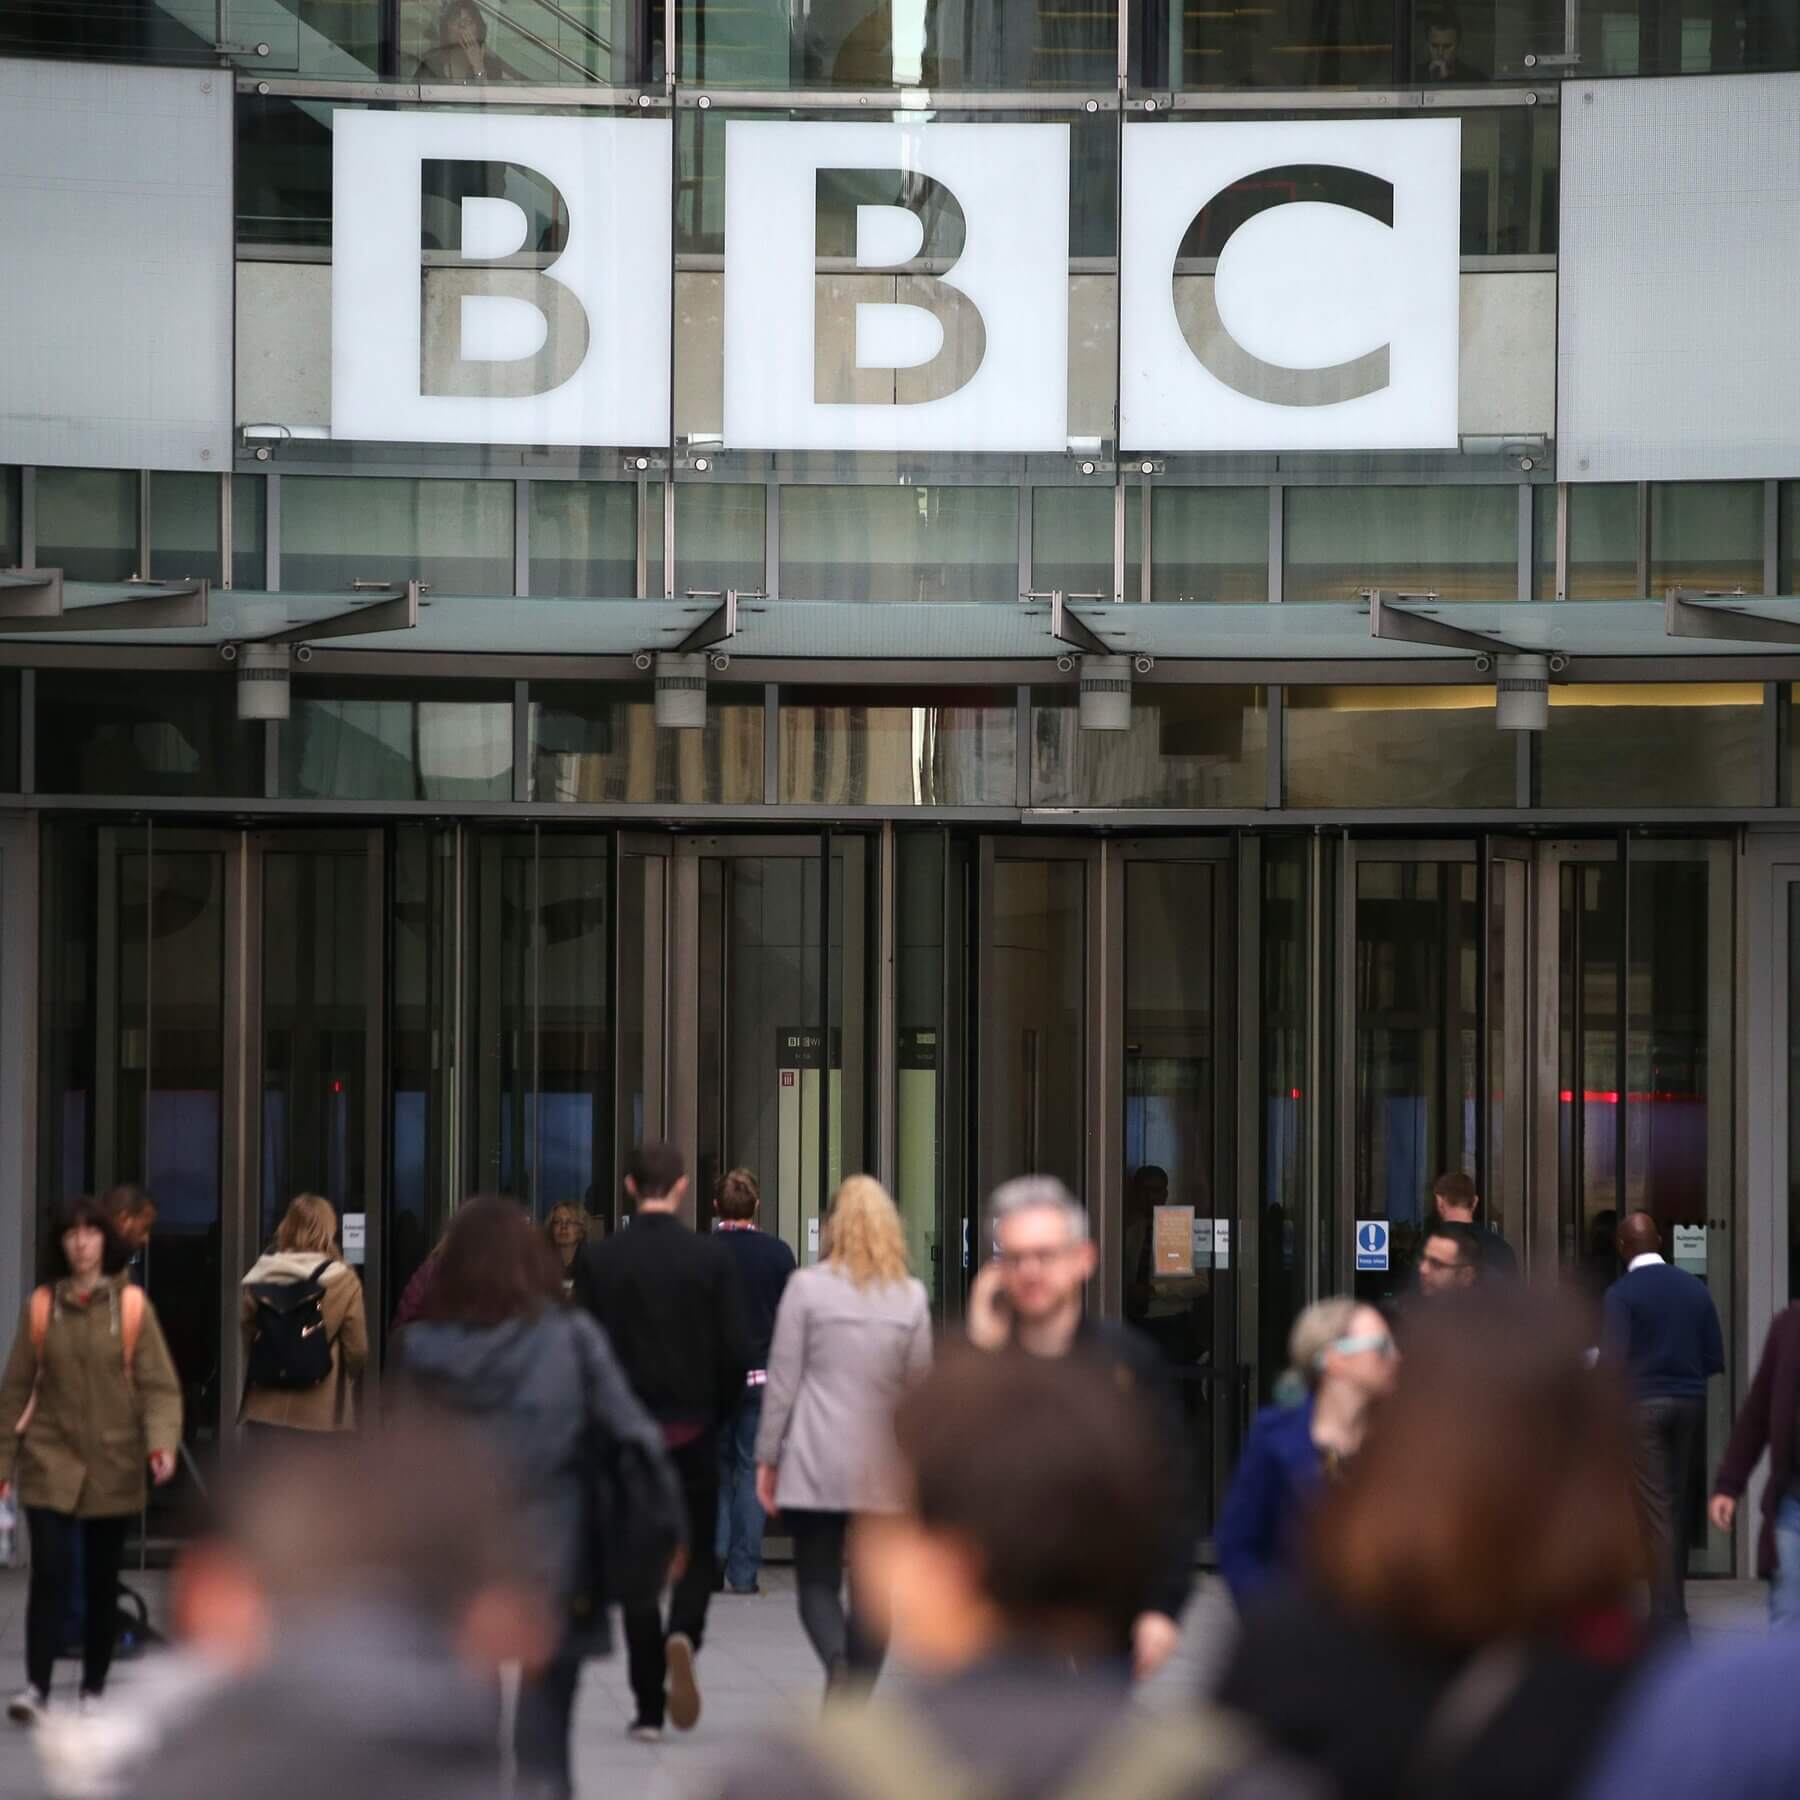 BBC Journalist Leaves Russia for ‘Exile’ in UK Due to “Unprecedented Surveillance”